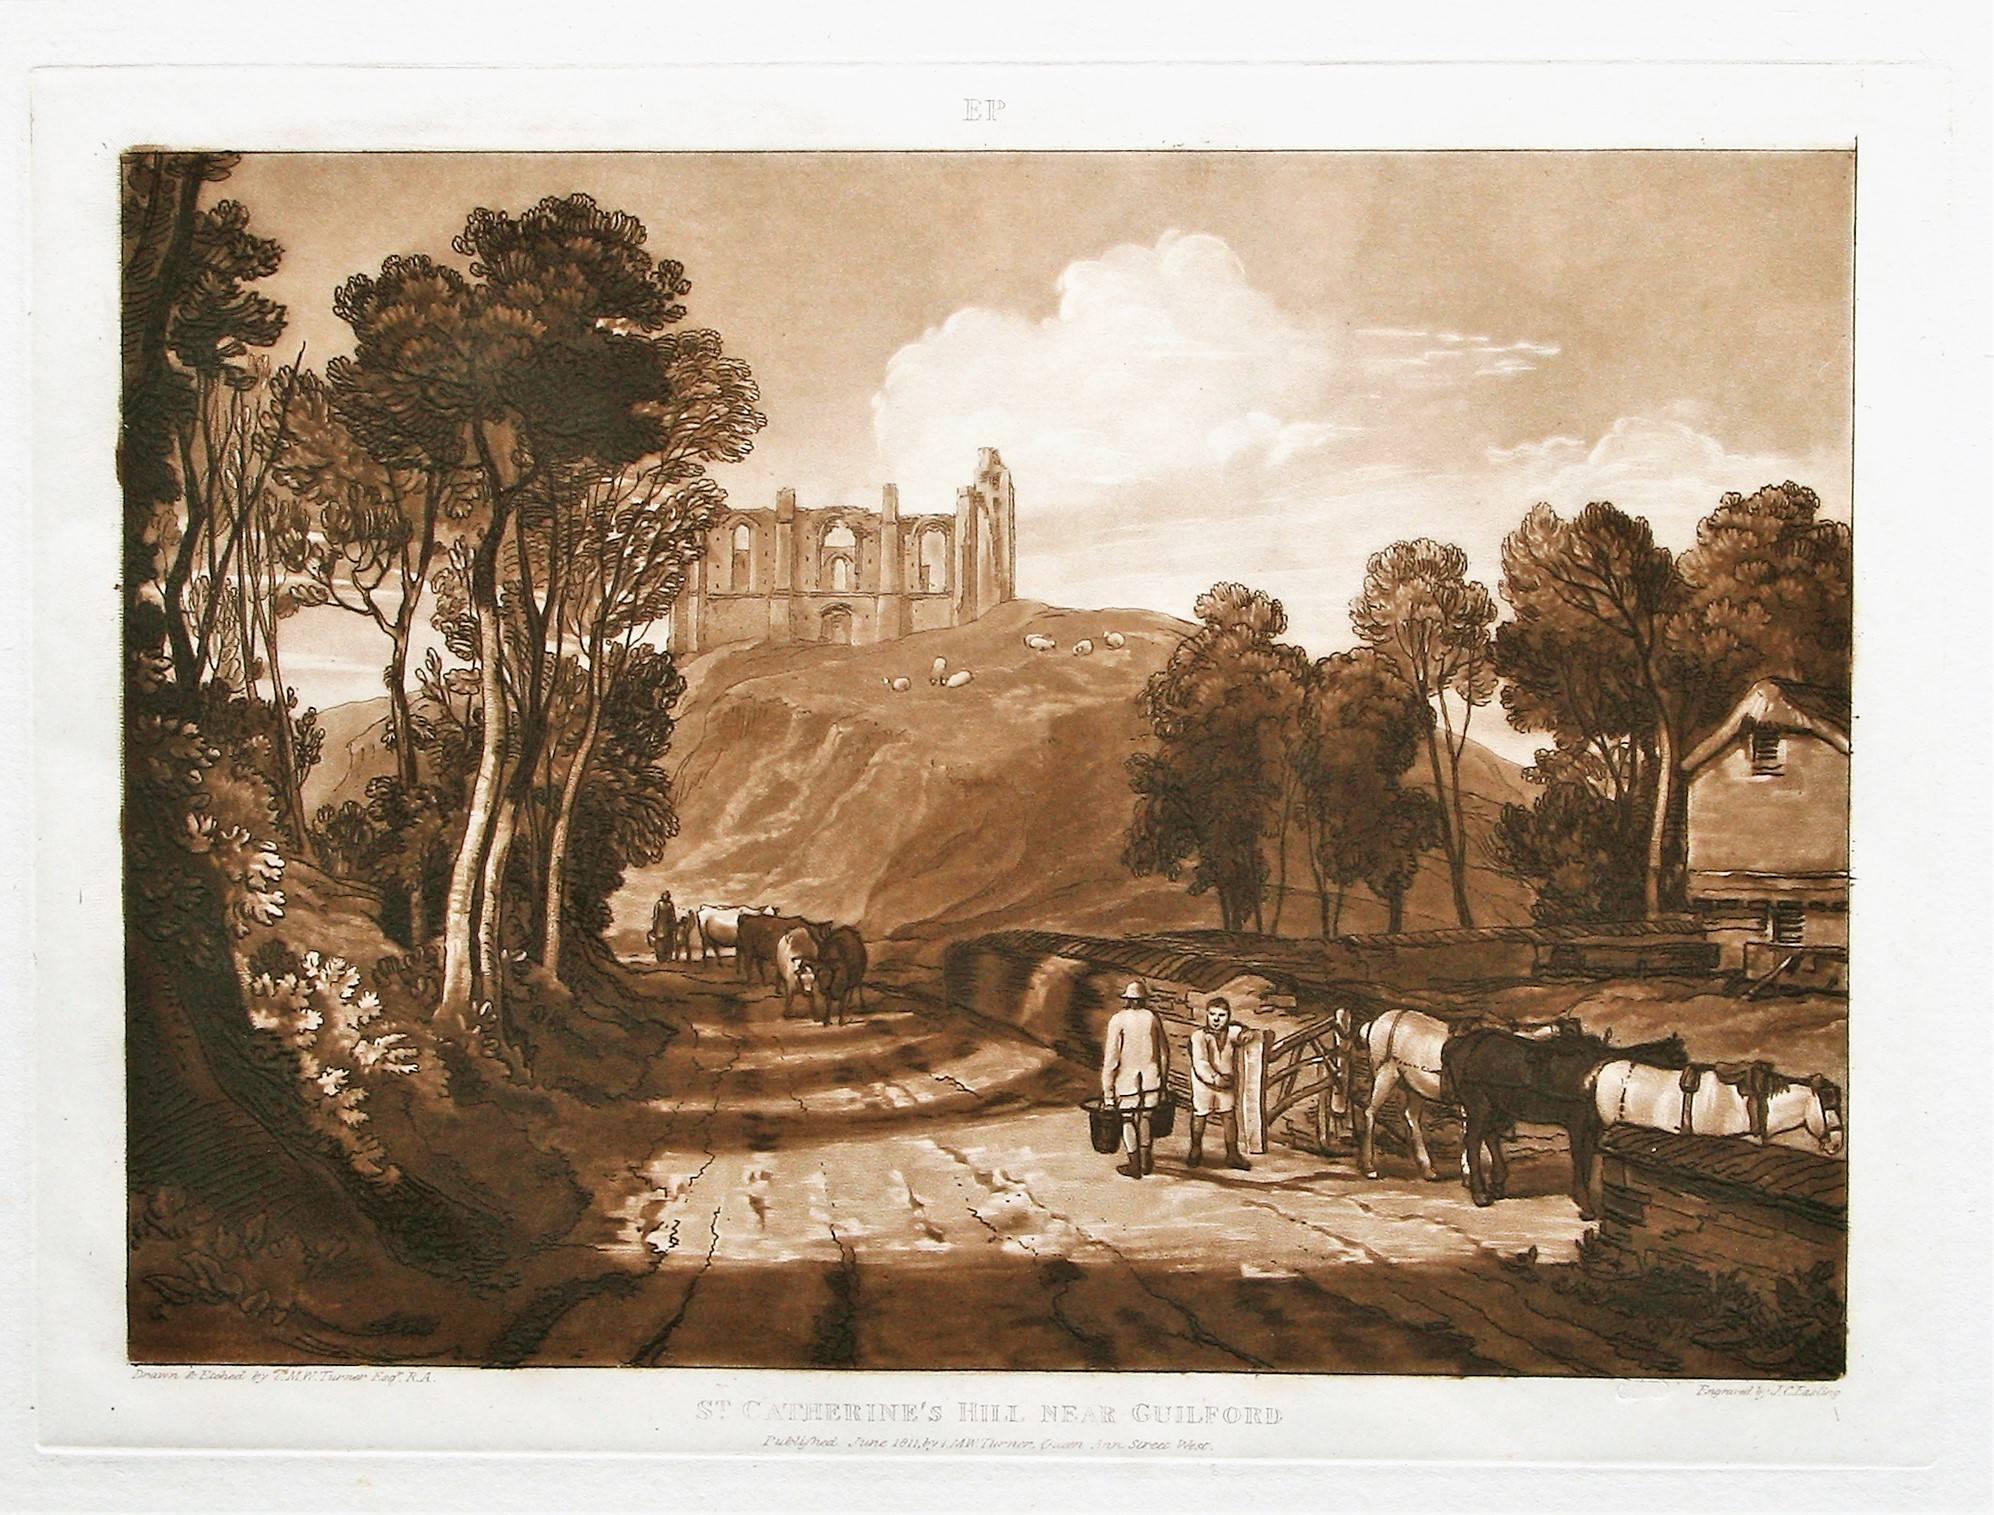 St. Catherine's Hill Near Guilford. - Print by J.M.W. Turner